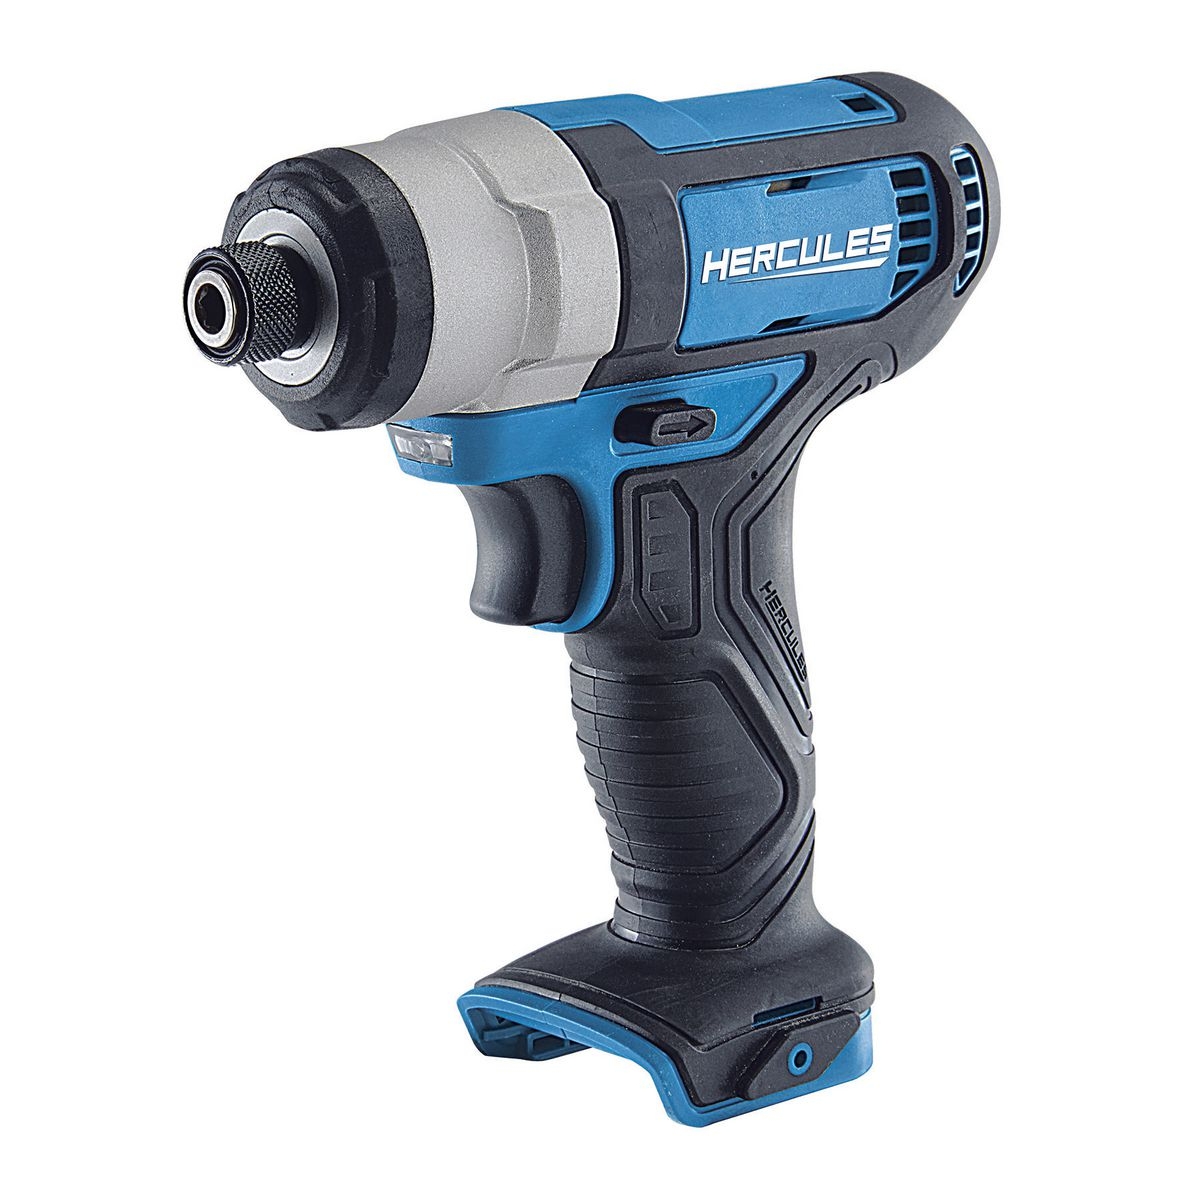 HERCULES 12v Cordless 1/4 in. Hex Compact Impact Driver – Tool Only